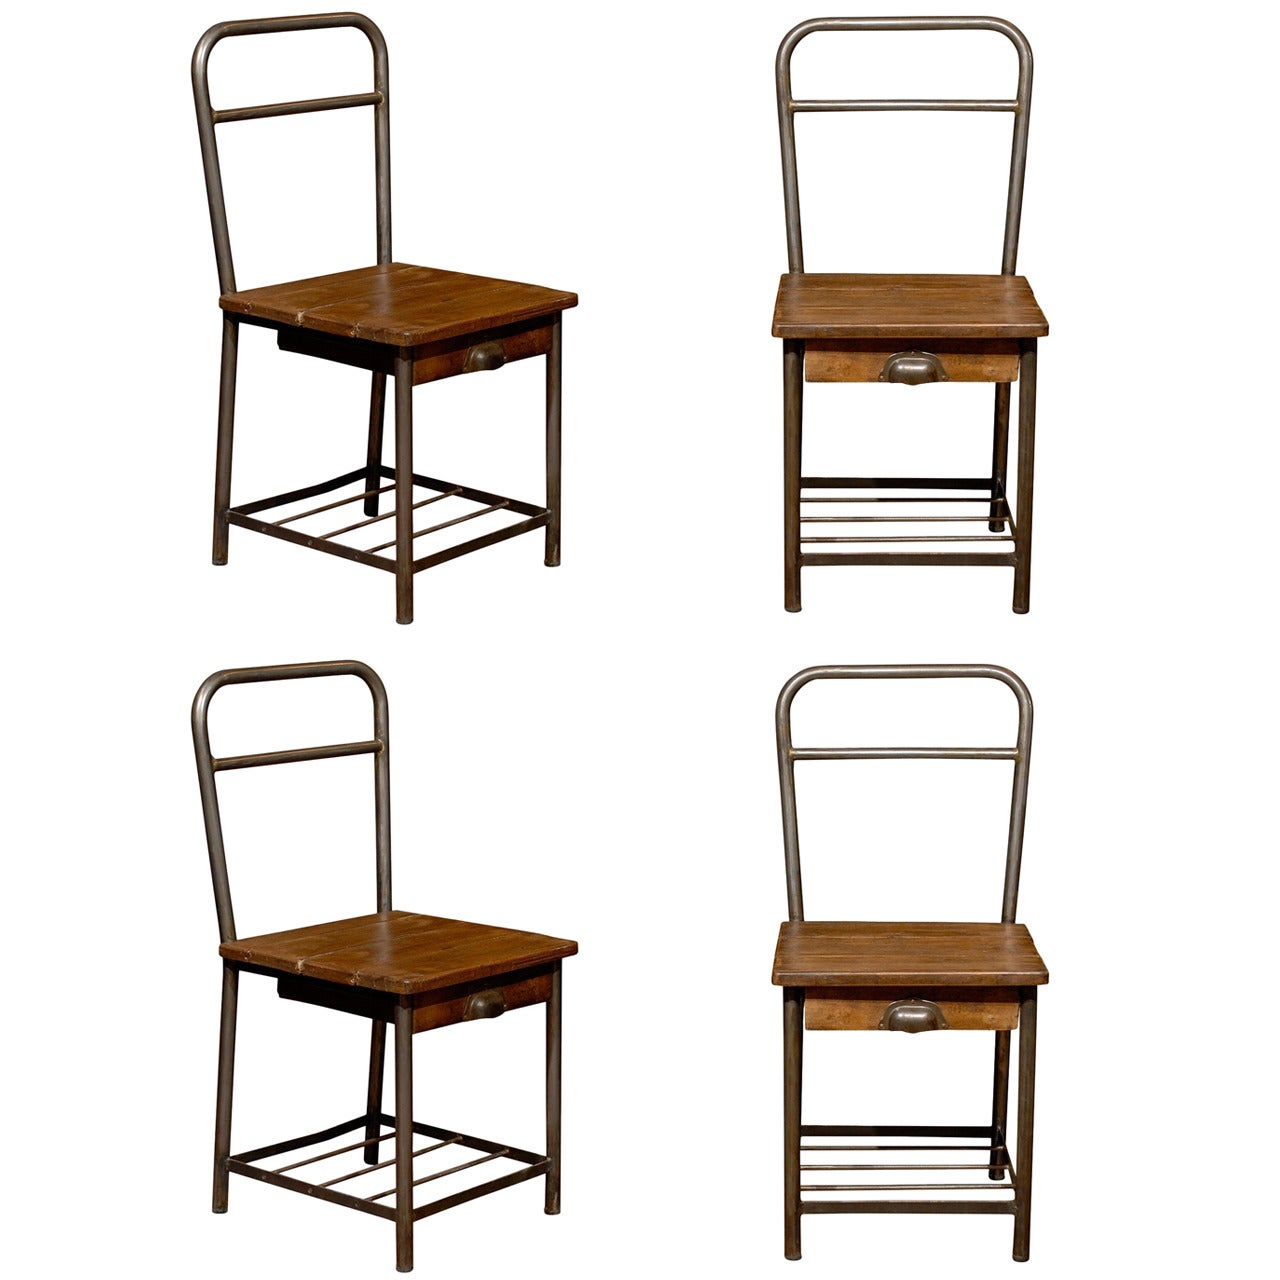 Pair of French Industrial Chairs